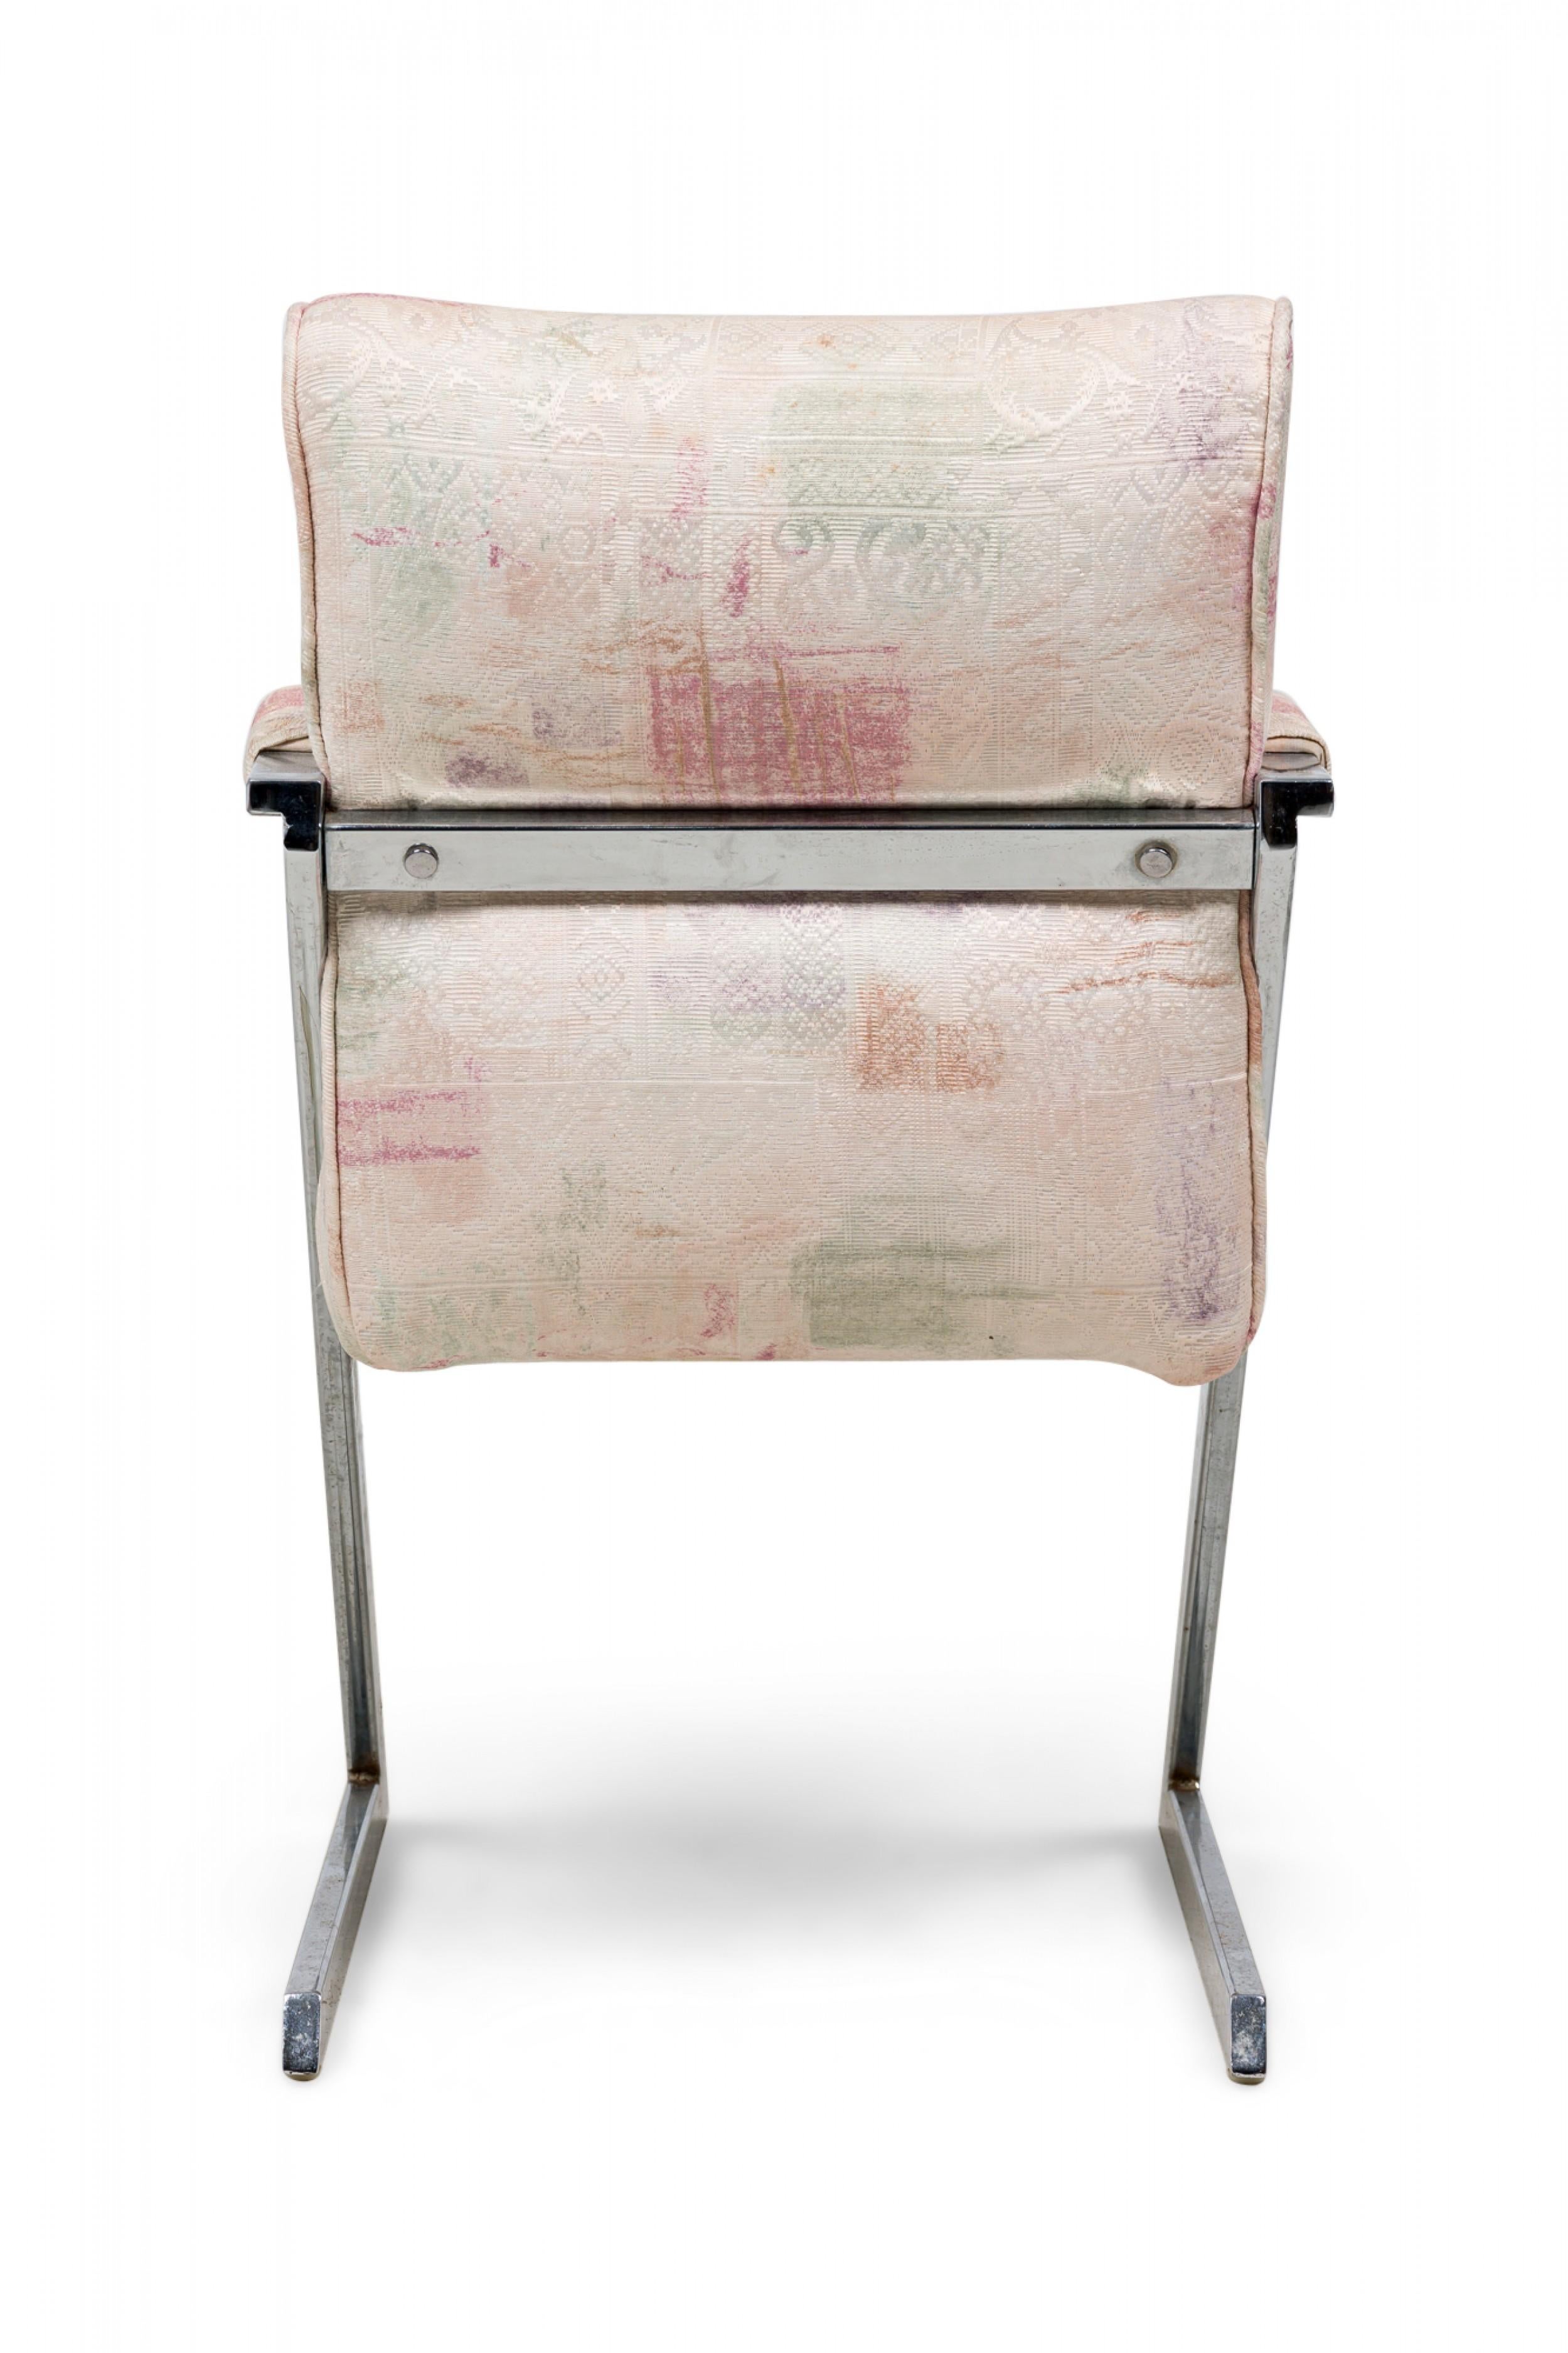 Metal Set of 6 Dia Midcentury American Chrome Z Chairs in Beige and Pastel Upholstery For Sale